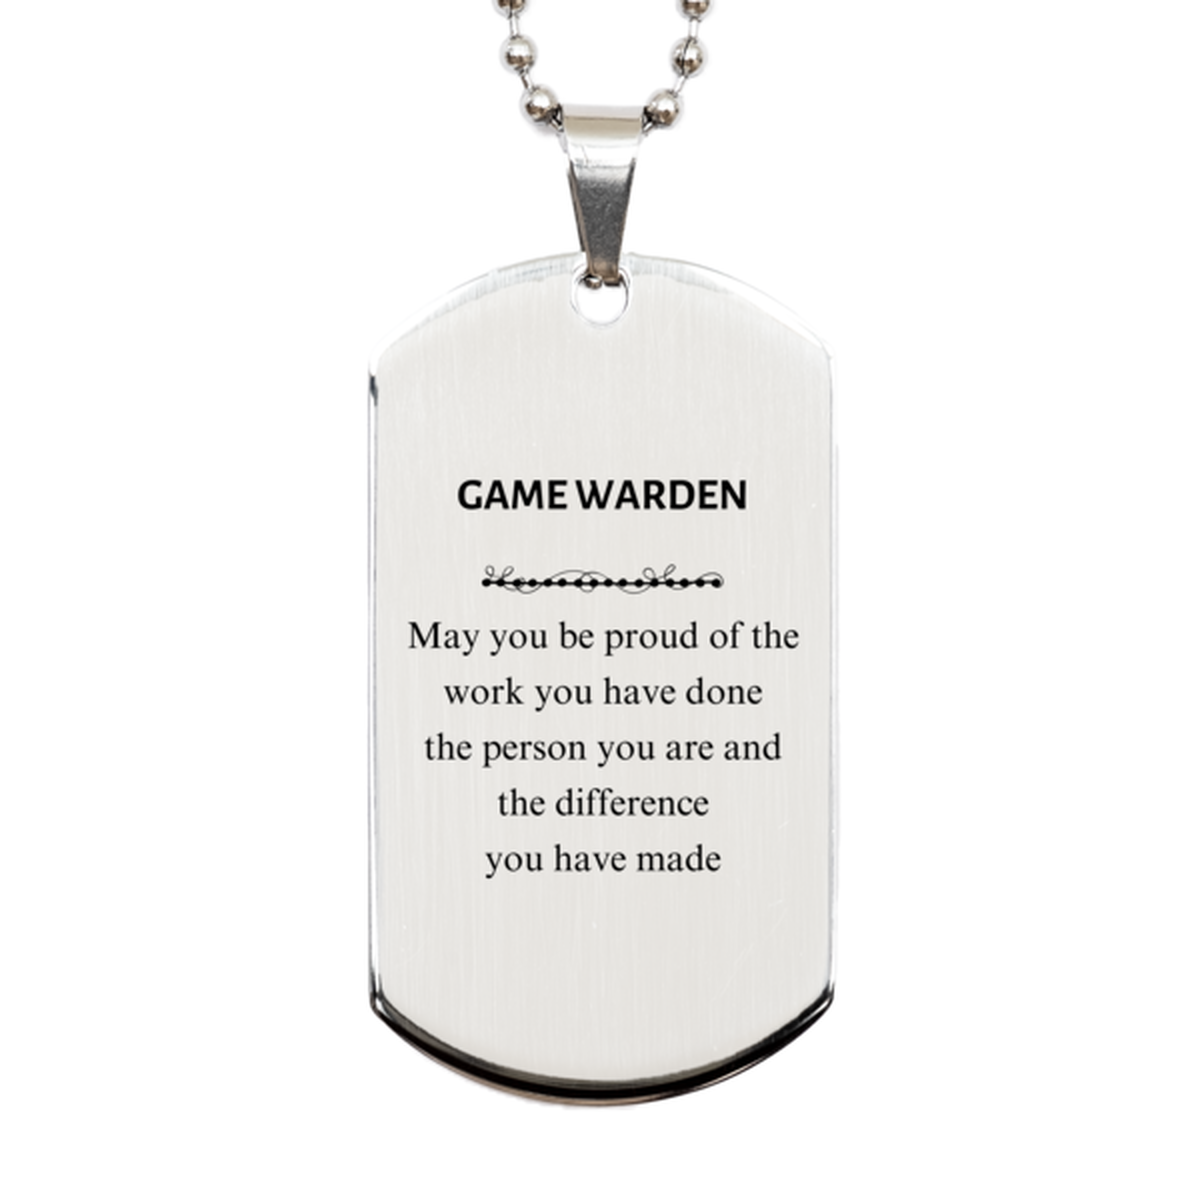 Game Warden May you be proud of the work you have done, Retirement Game Warden Silver Dog Tag for Colleague Appreciation Gifts Amazing for Game Warden